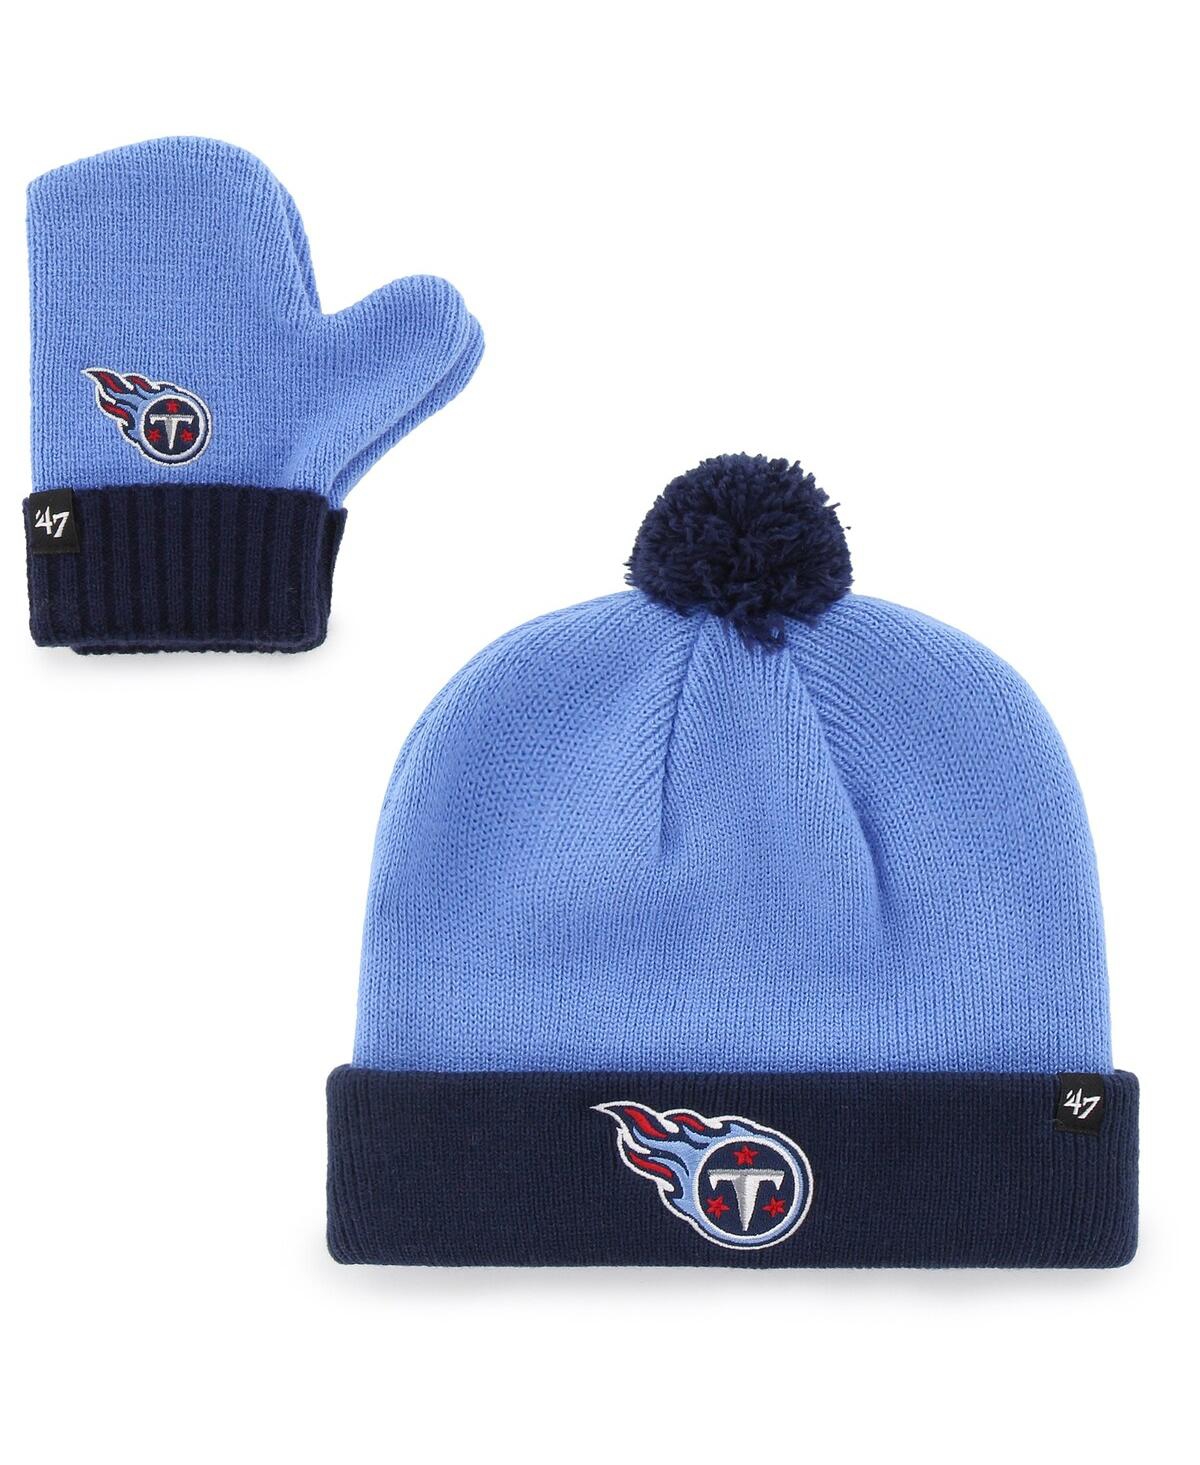 47 Brand Babies' Toddler Unisex Light Blue And Navy Tennessee Titans Bam Bam Cuffed Knit Hat With Pom And Mittens Set In Light Blue,navy